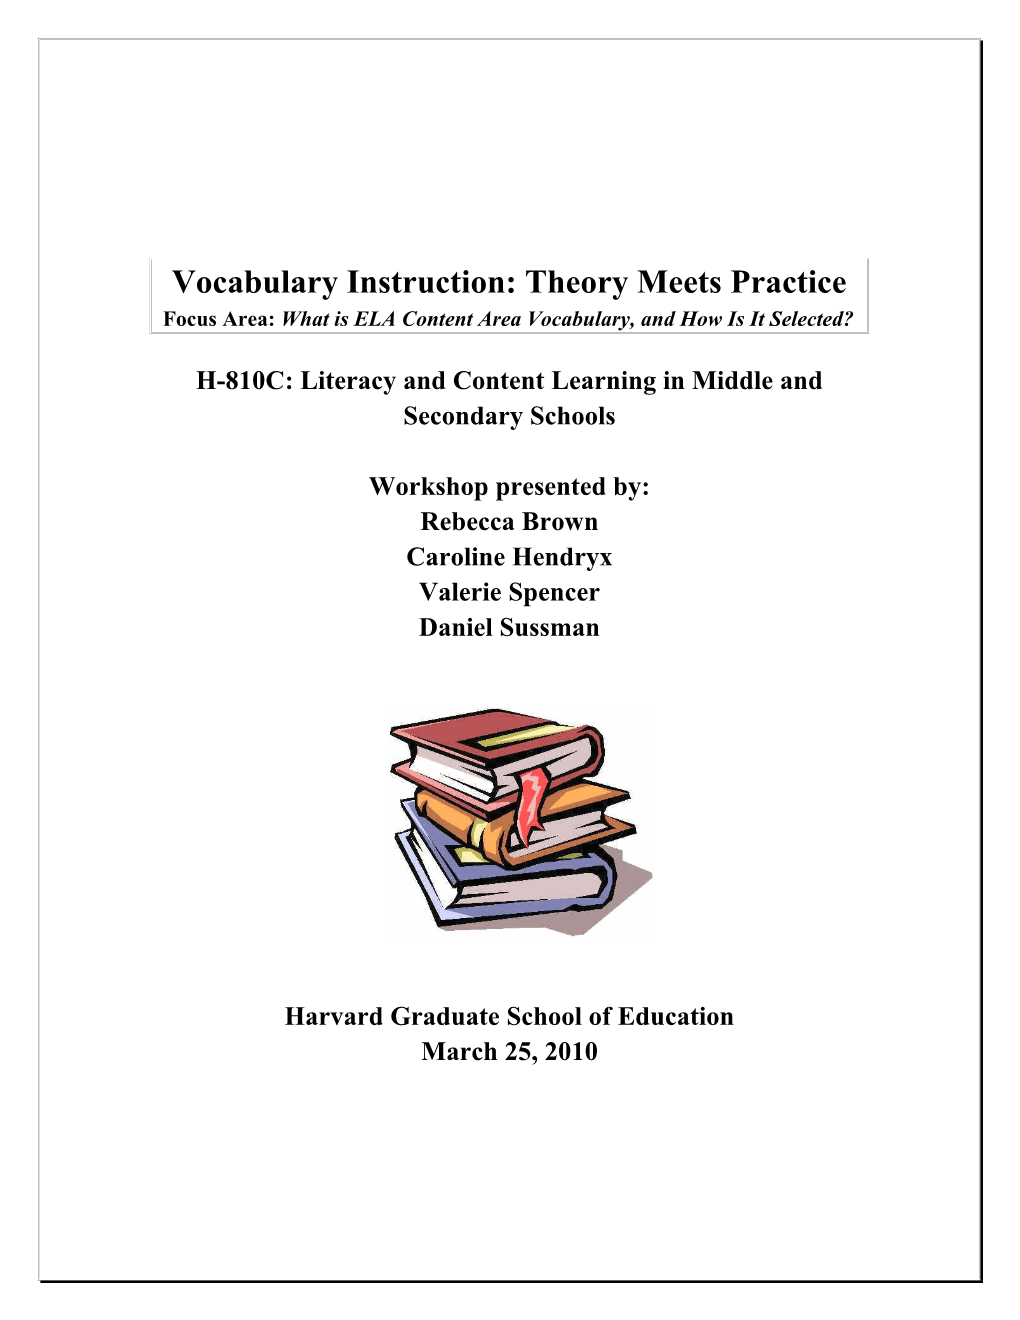 Vocabulary Instruction: Theory Meets Practice